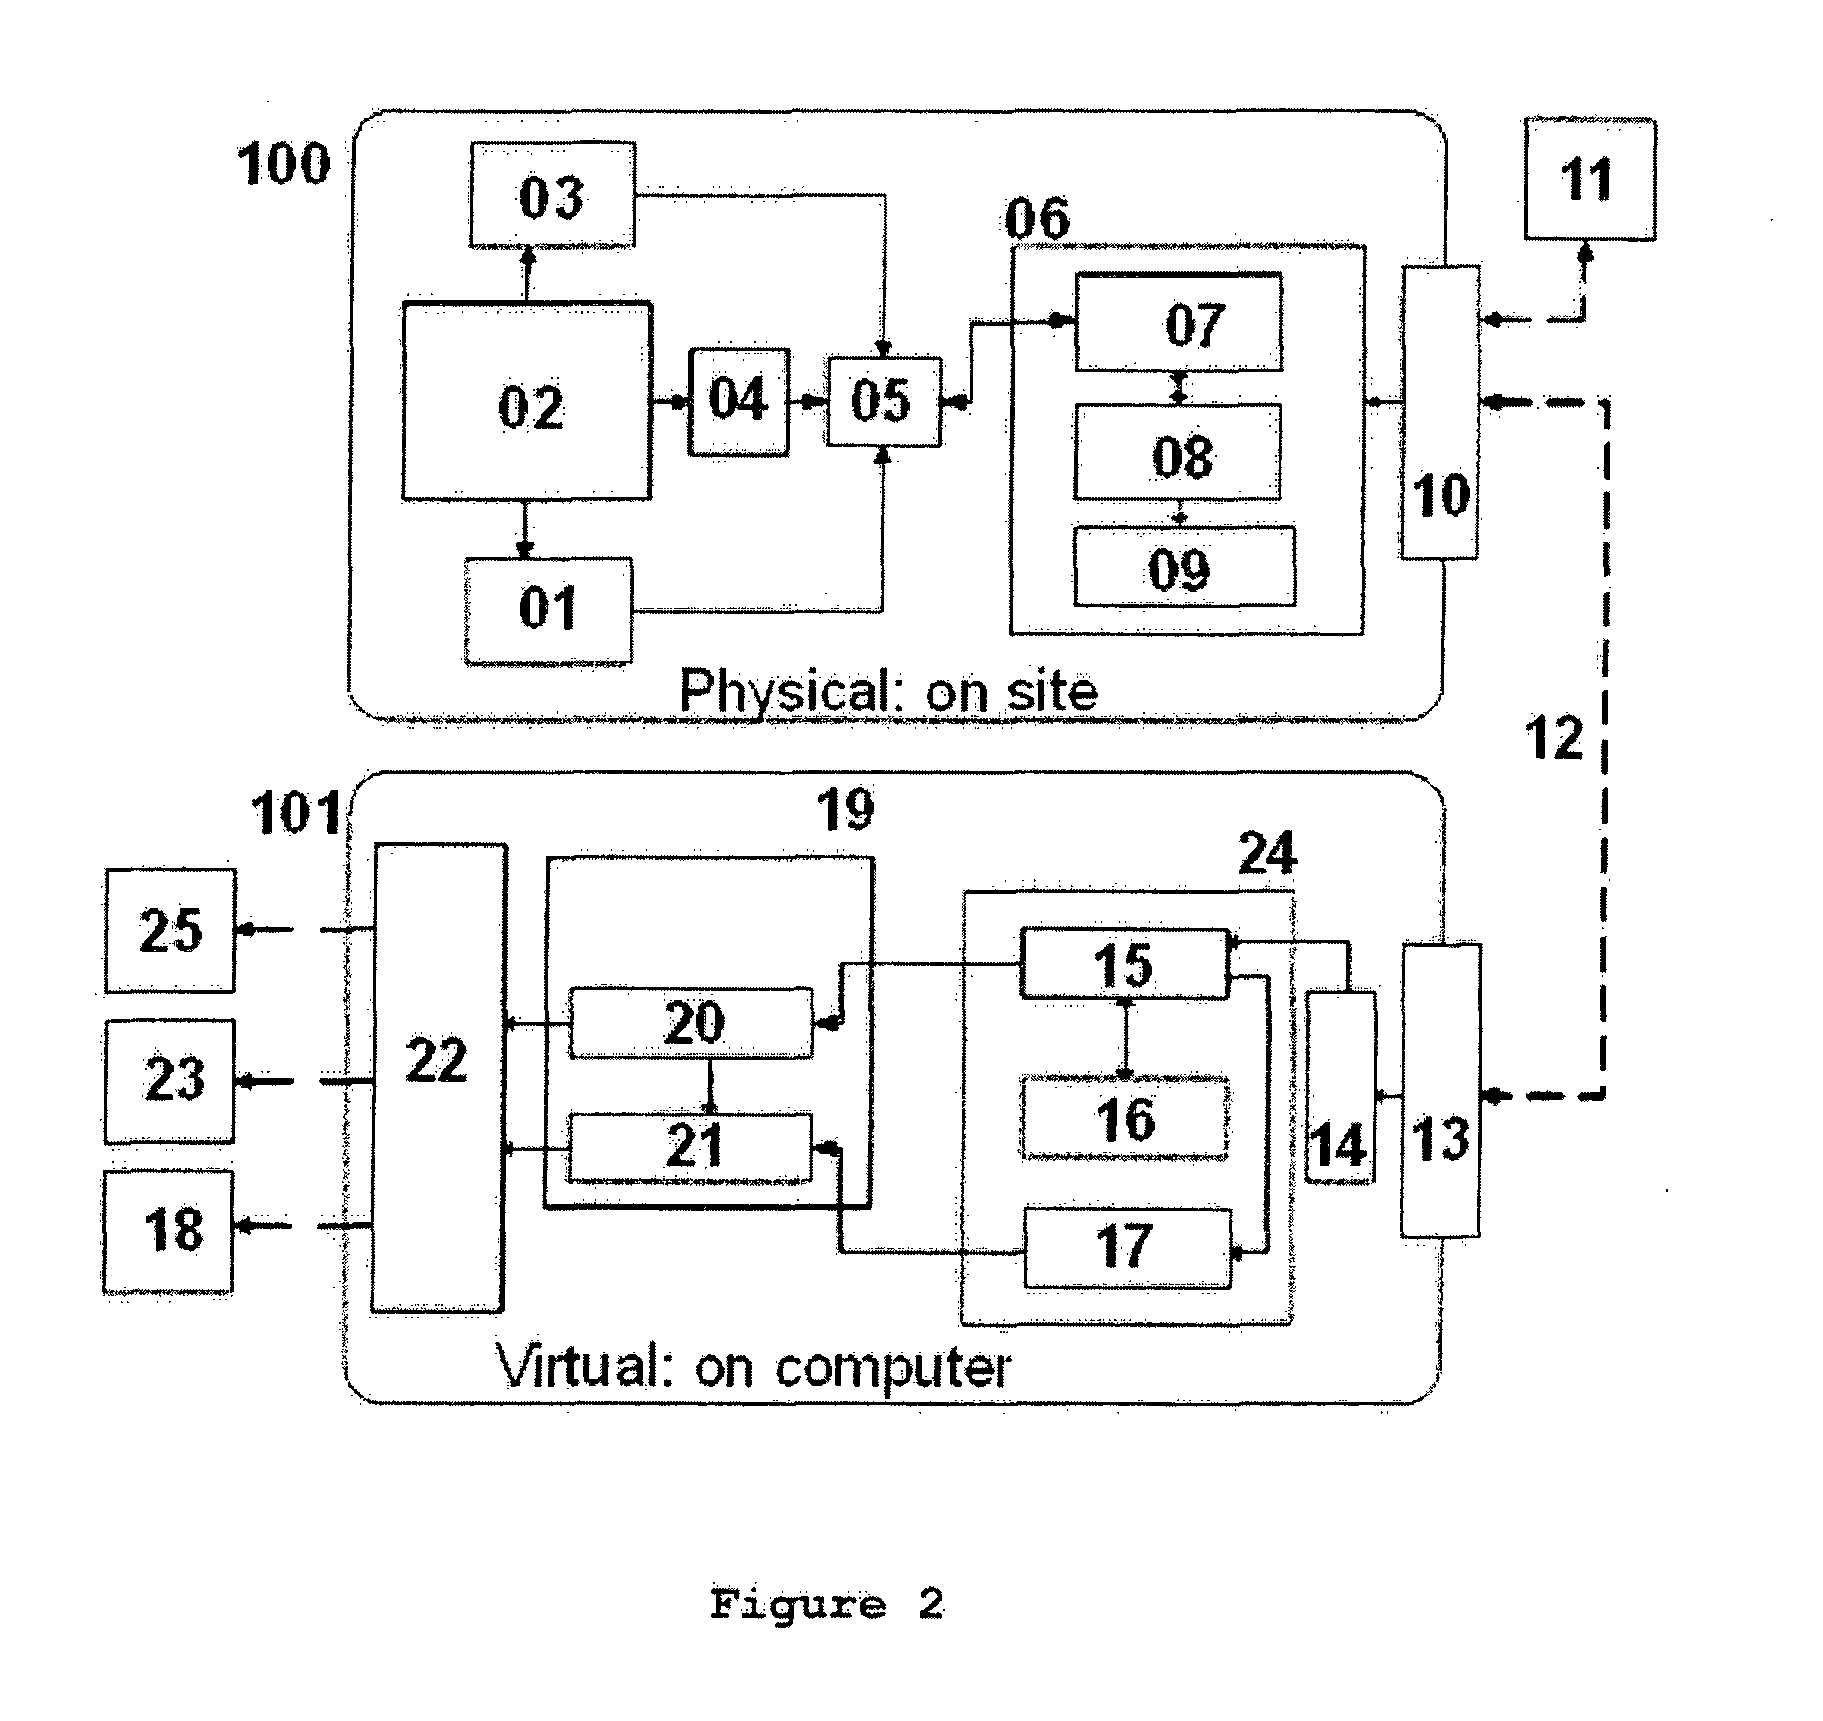 Structural health management system and method based on combined physical and simulated data